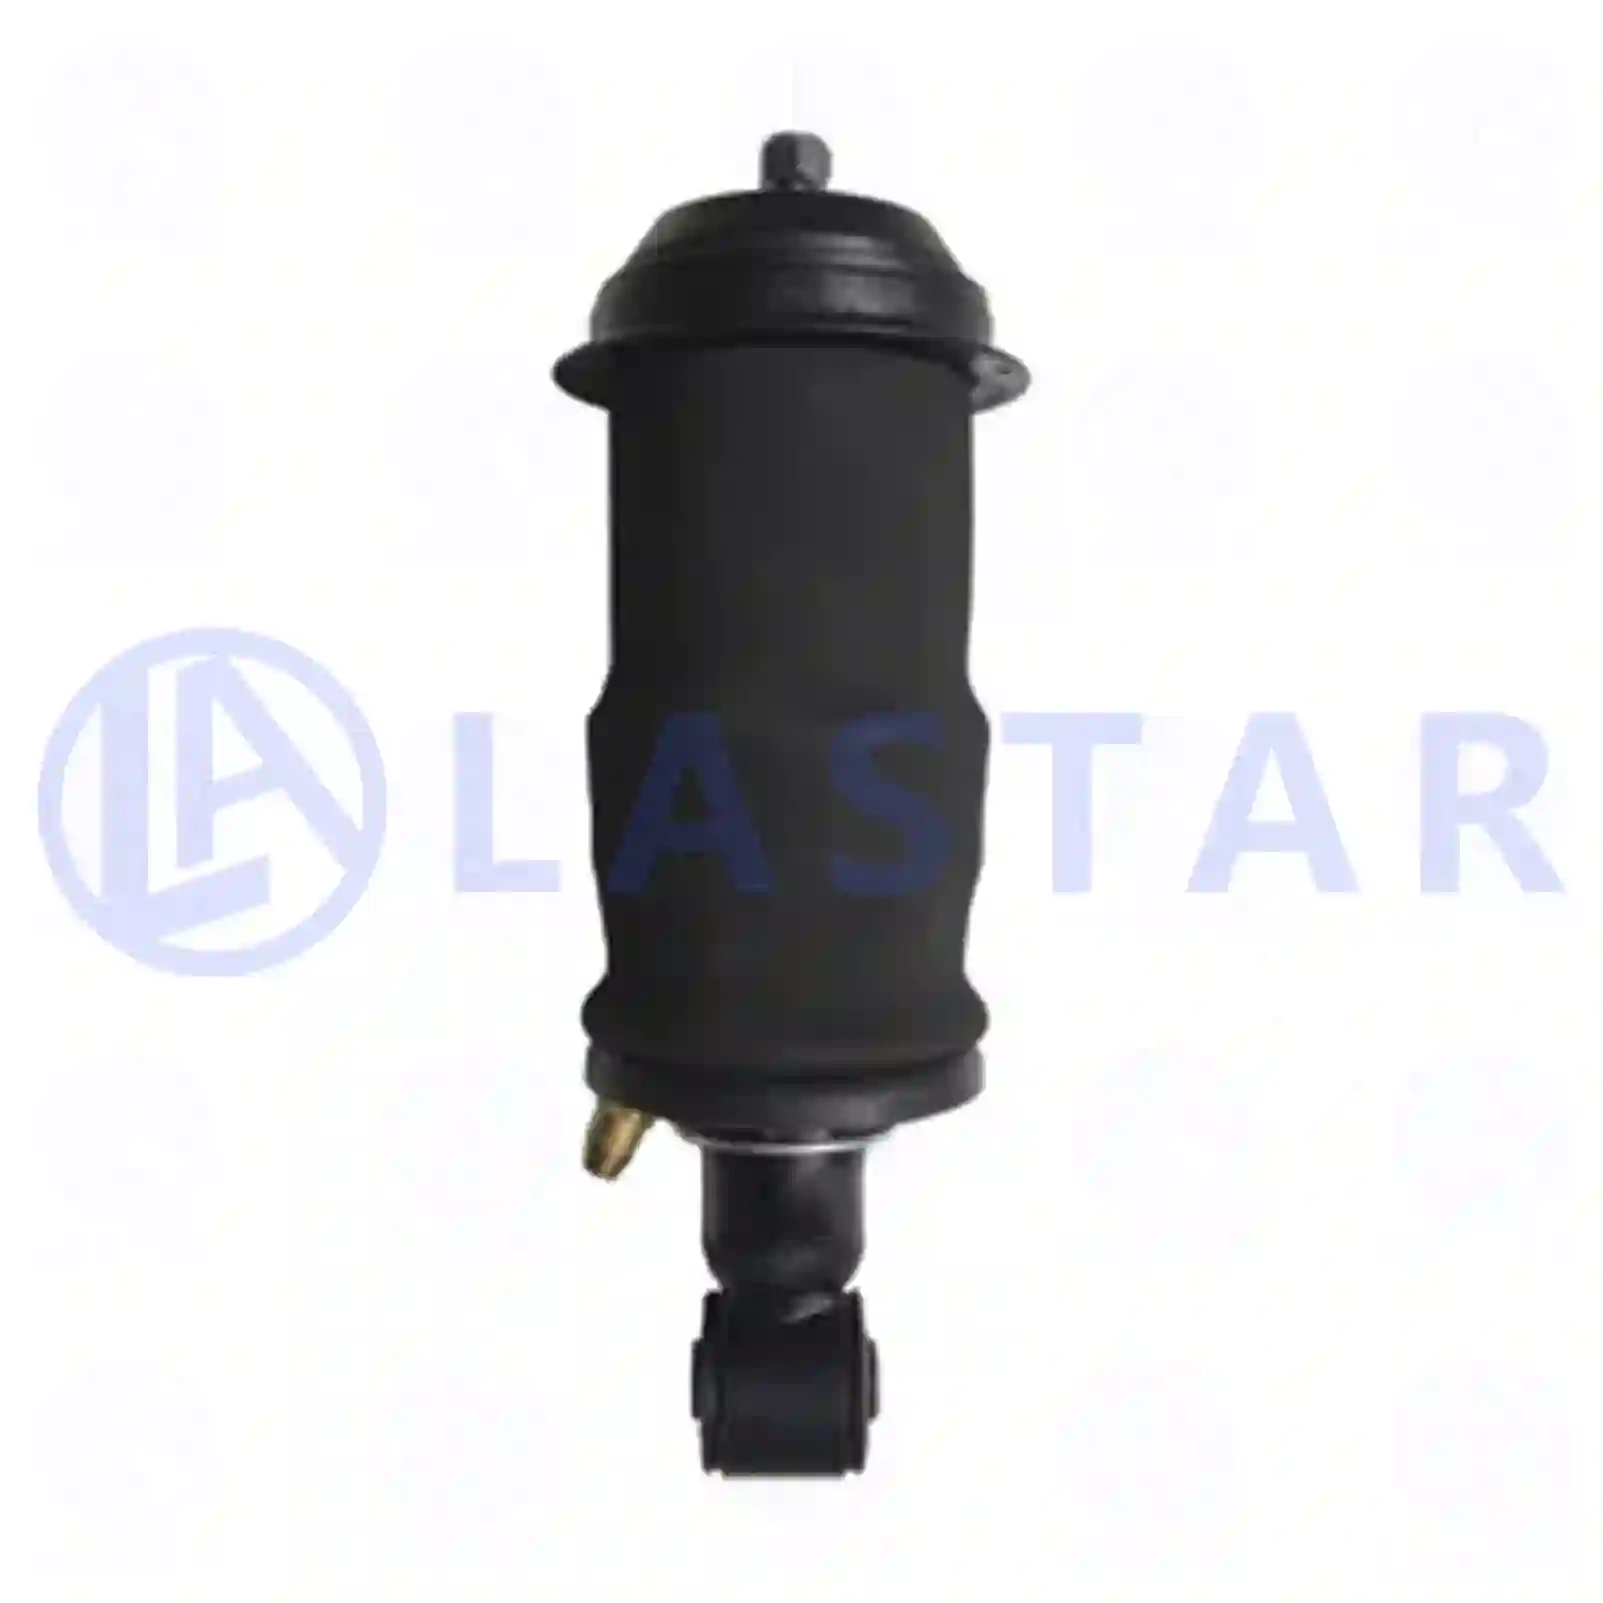 Cabin shock absorber, with air bellow, 77735817, 1873668, , , , , ||  77735817 Lastar Spare Part | Truck Spare Parts, Auotomotive Spare Parts Cabin shock absorber, with air bellow, 77735817, 1873668, , , , , ||  77735817 Lastar Spare Part | Truck Spare Parts, Auotomotive Spare Parts